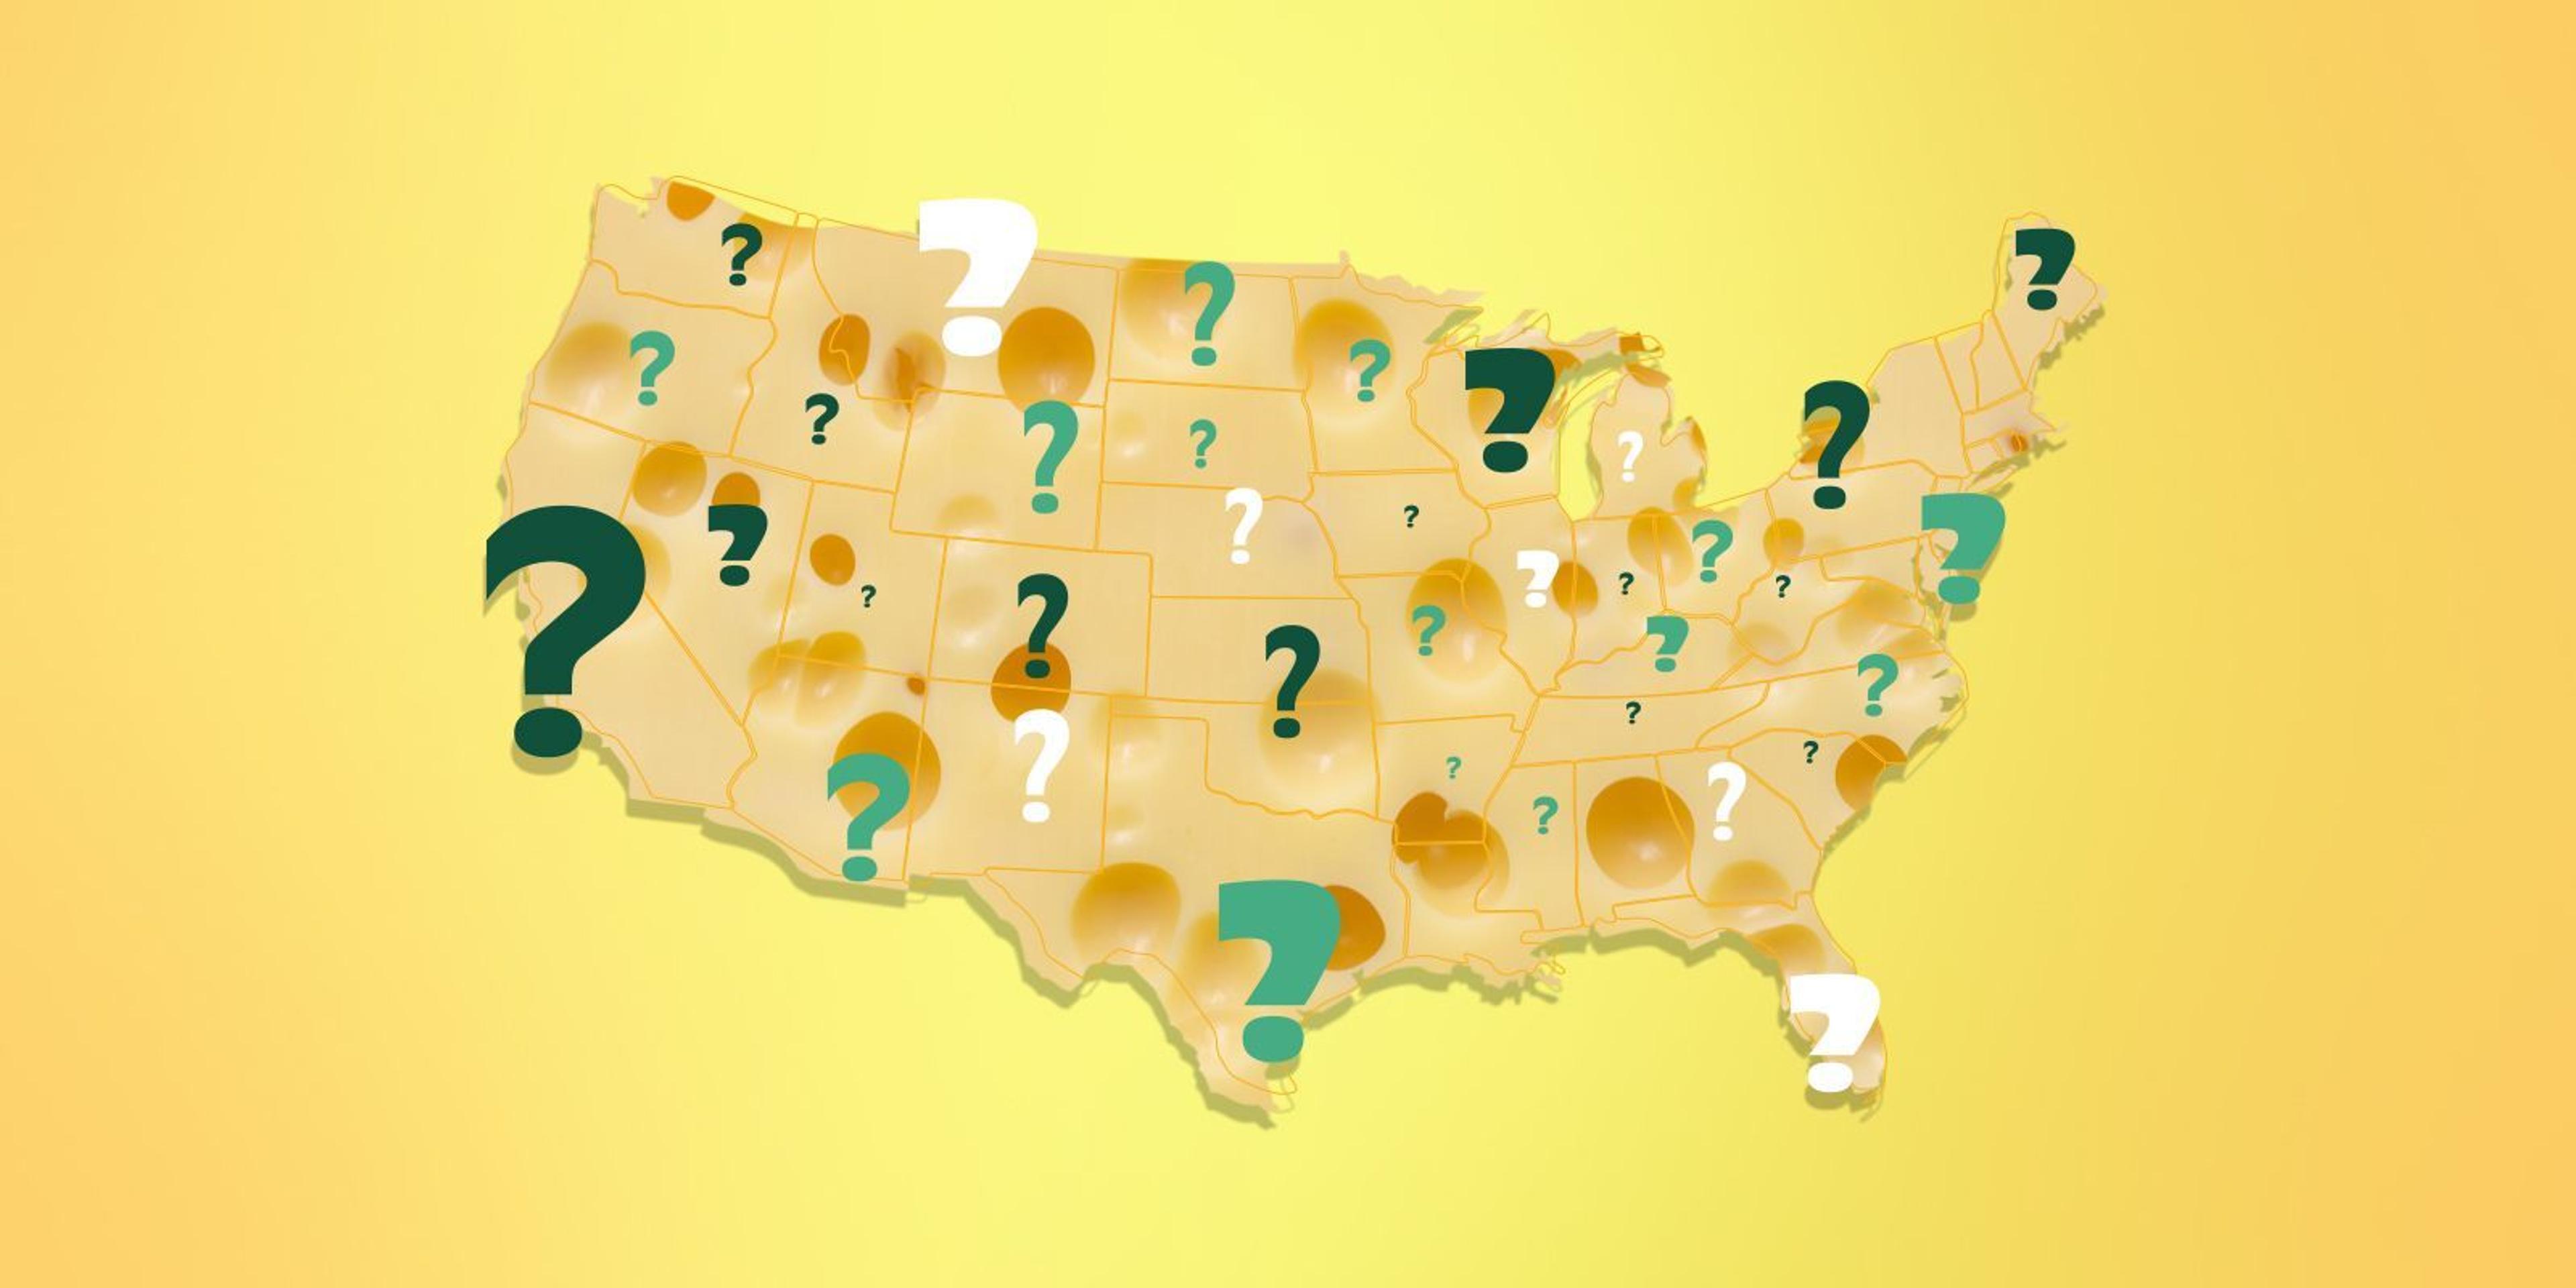 Map of the United States with different colored question marks over each state.